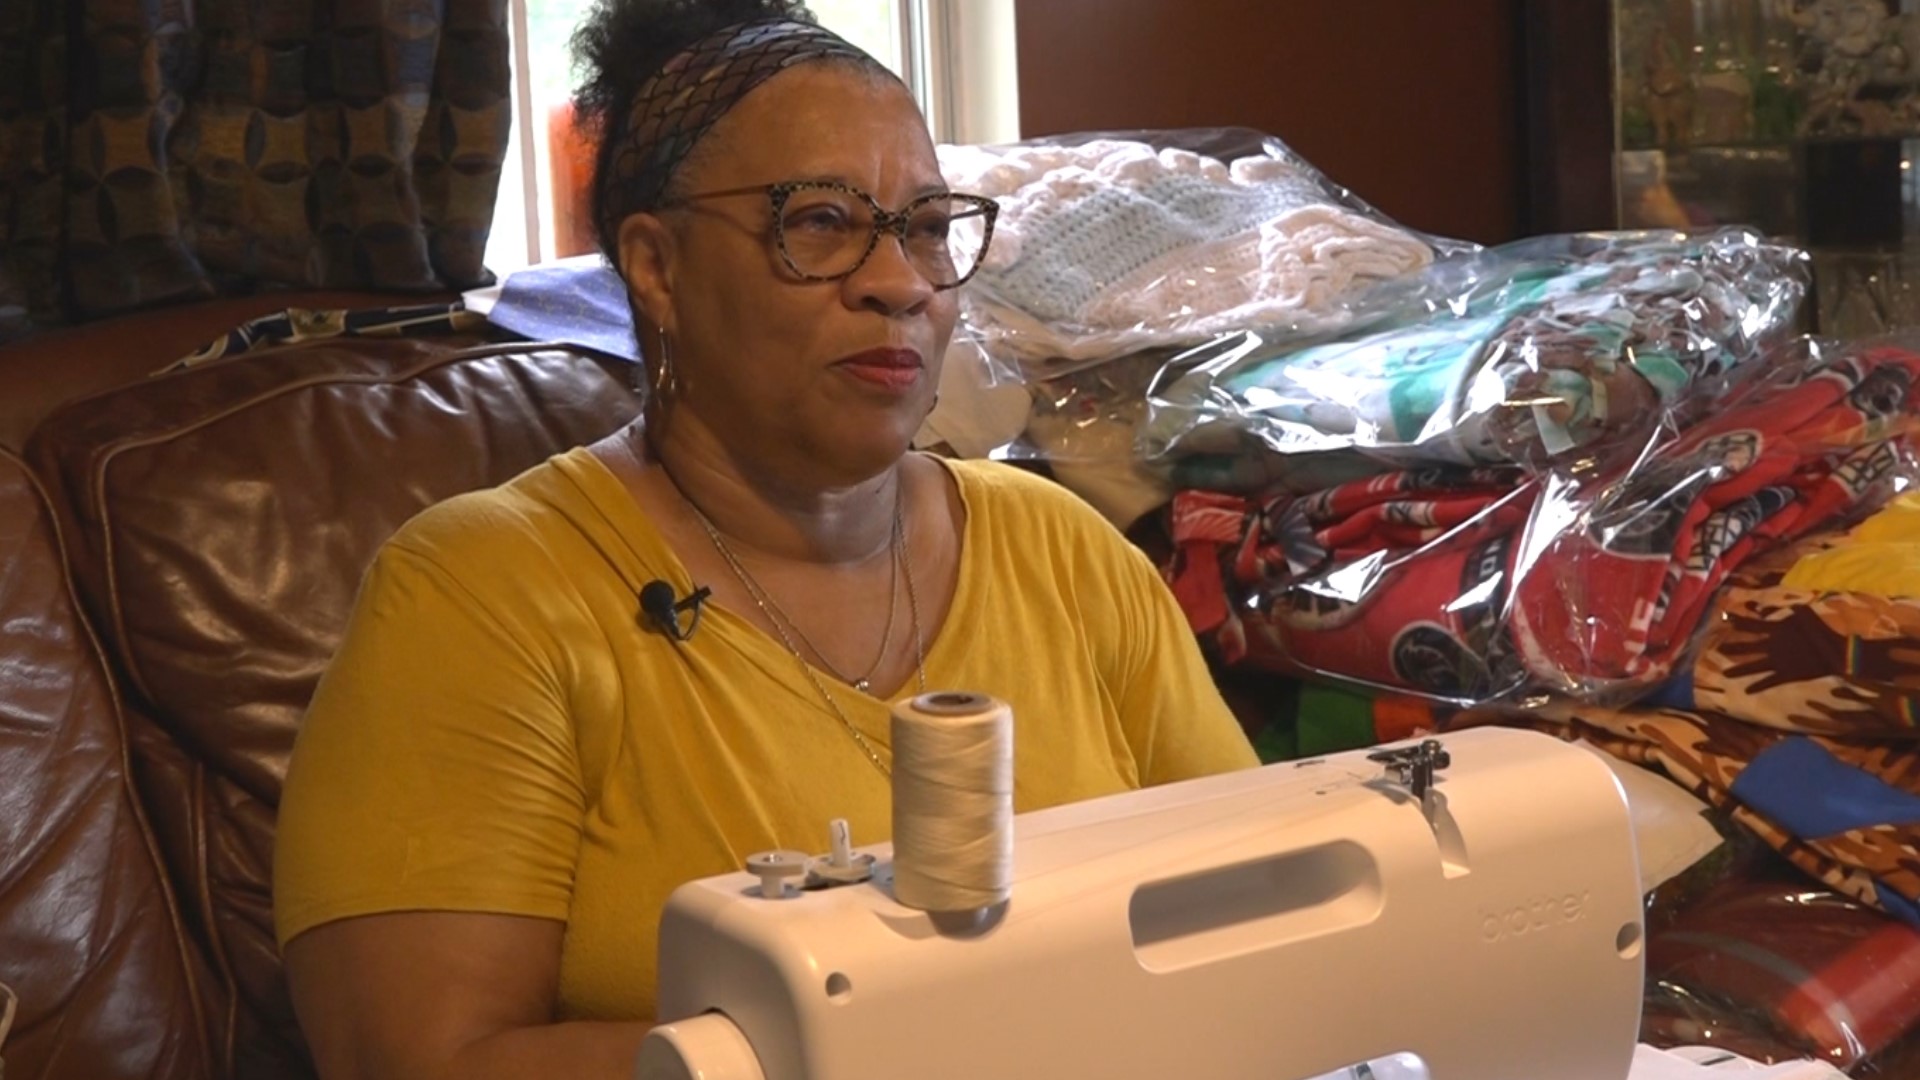 This is what brought her to buy a sewing machine for her living room in East Point and to sign up for a zoom class to learn during the pandemic.